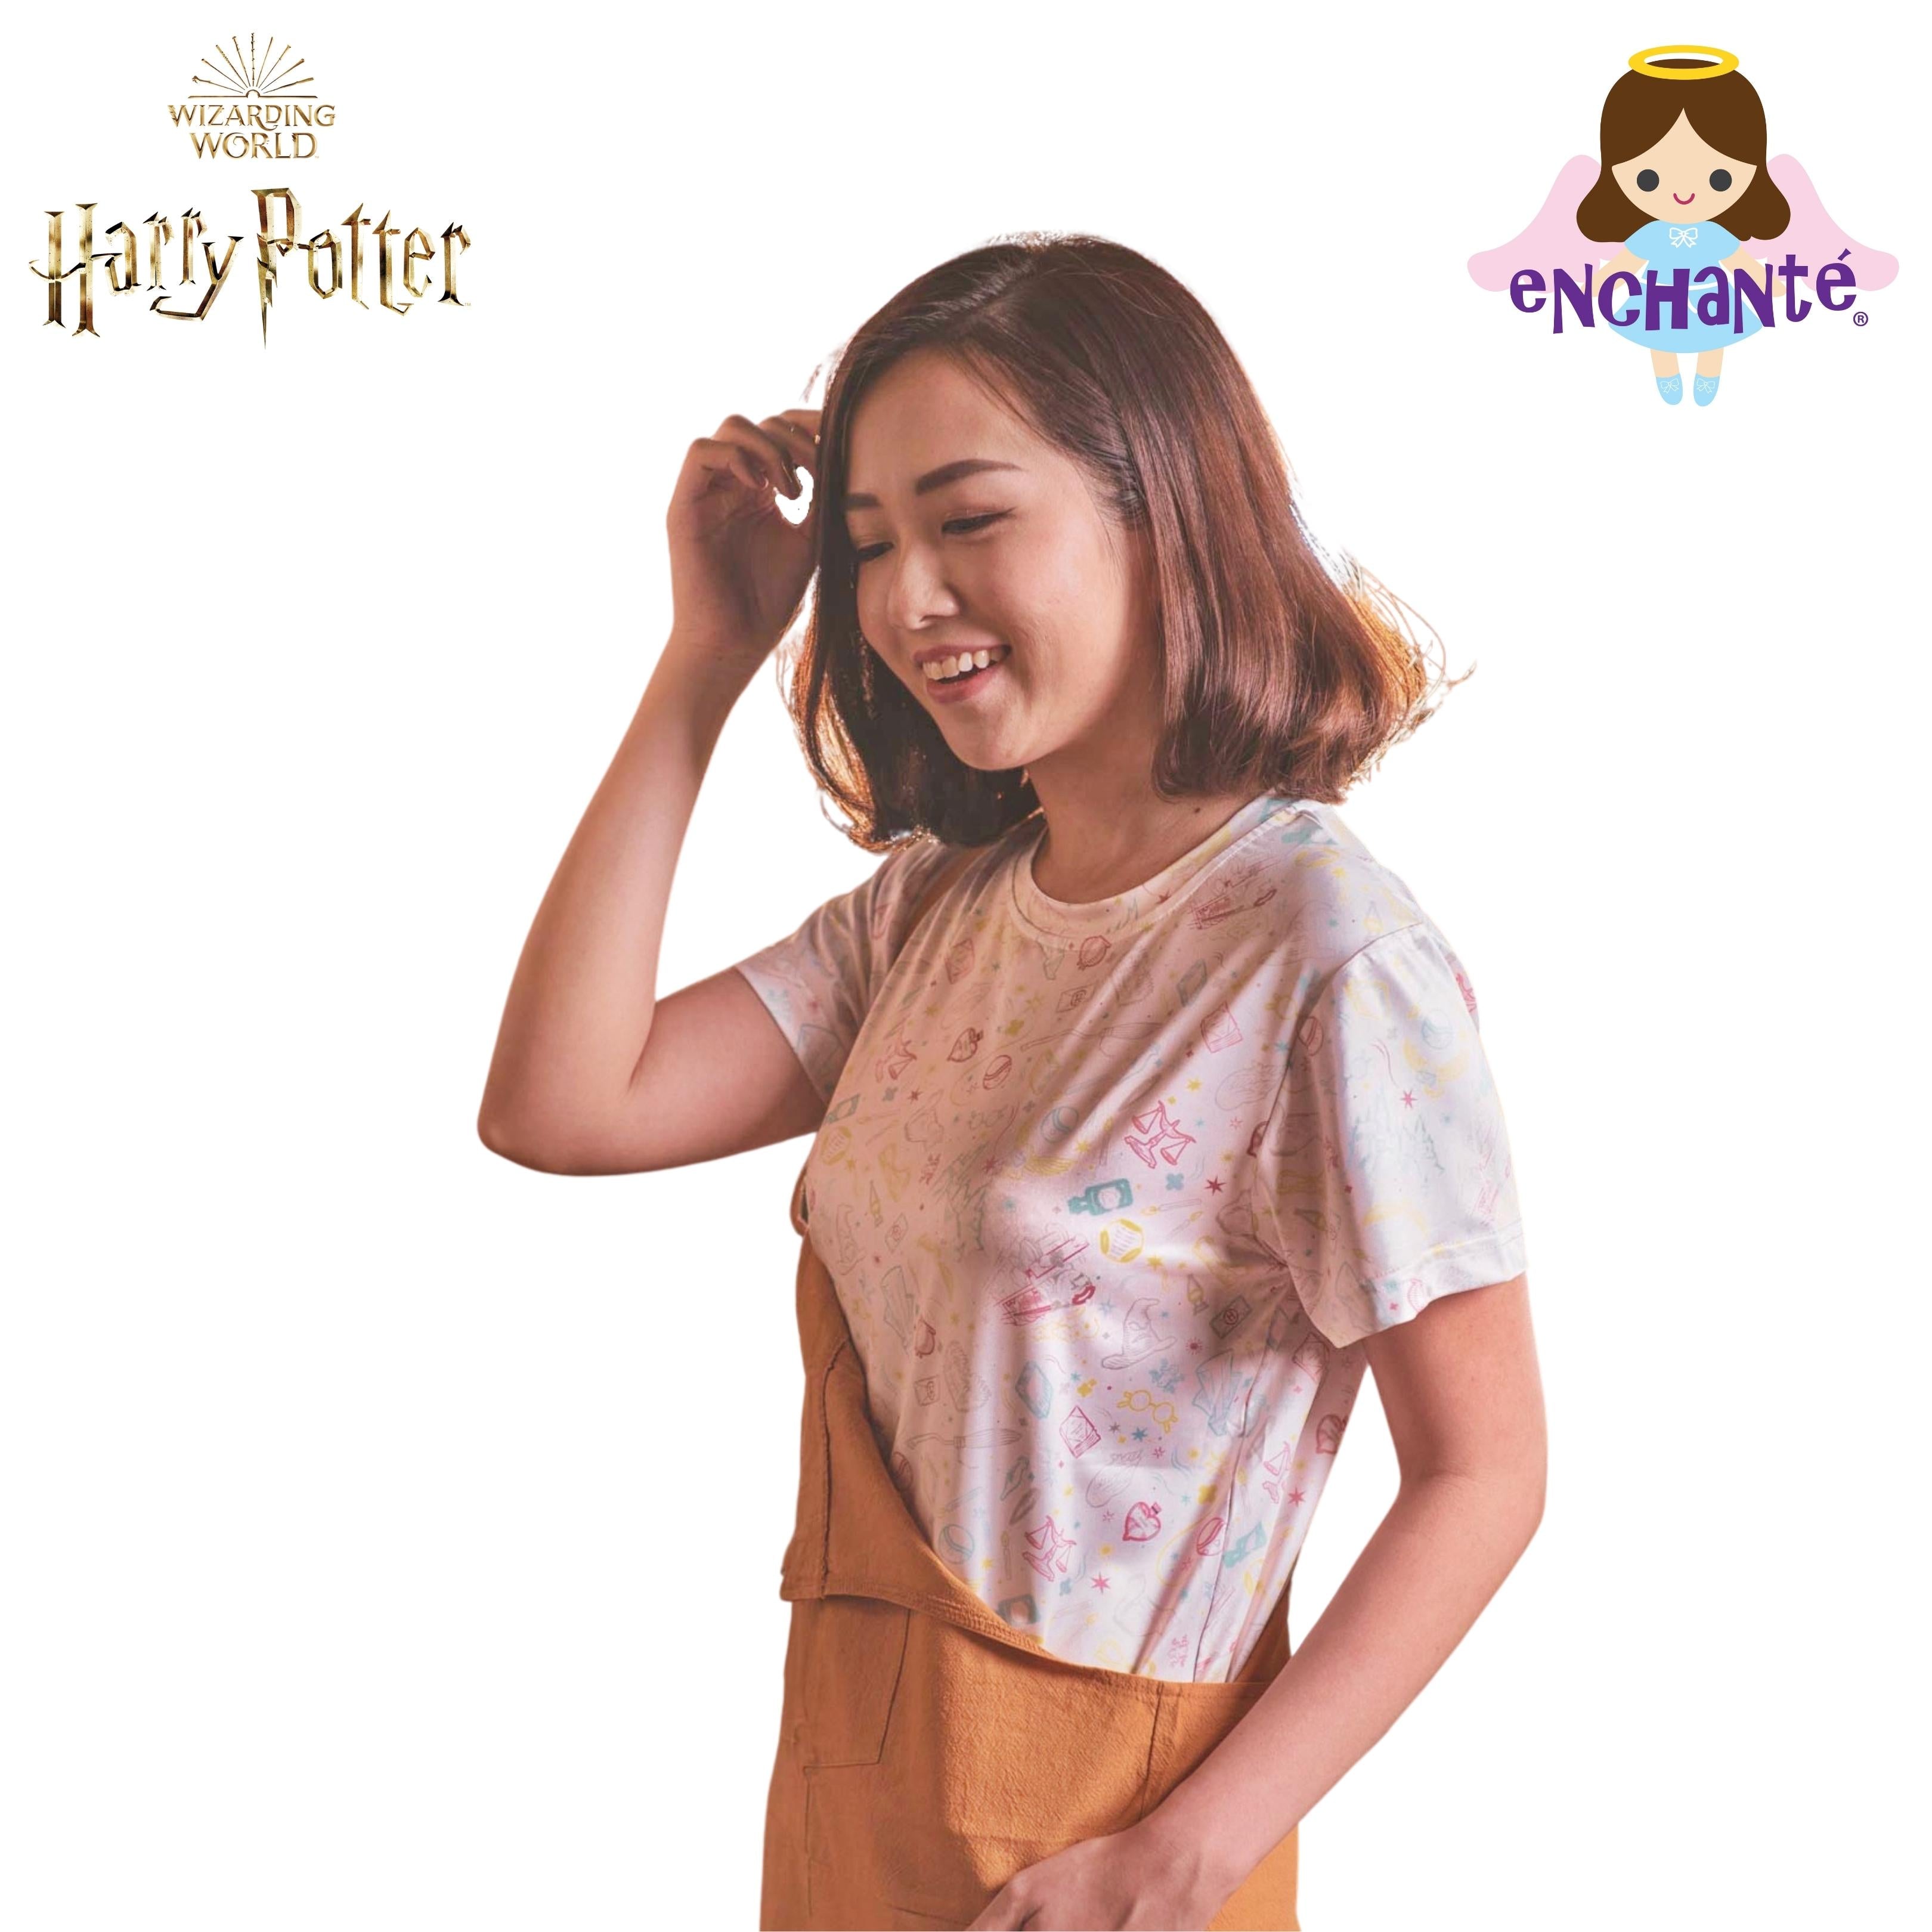 Harry Potter Welcome to Hogwarts Printed Tee